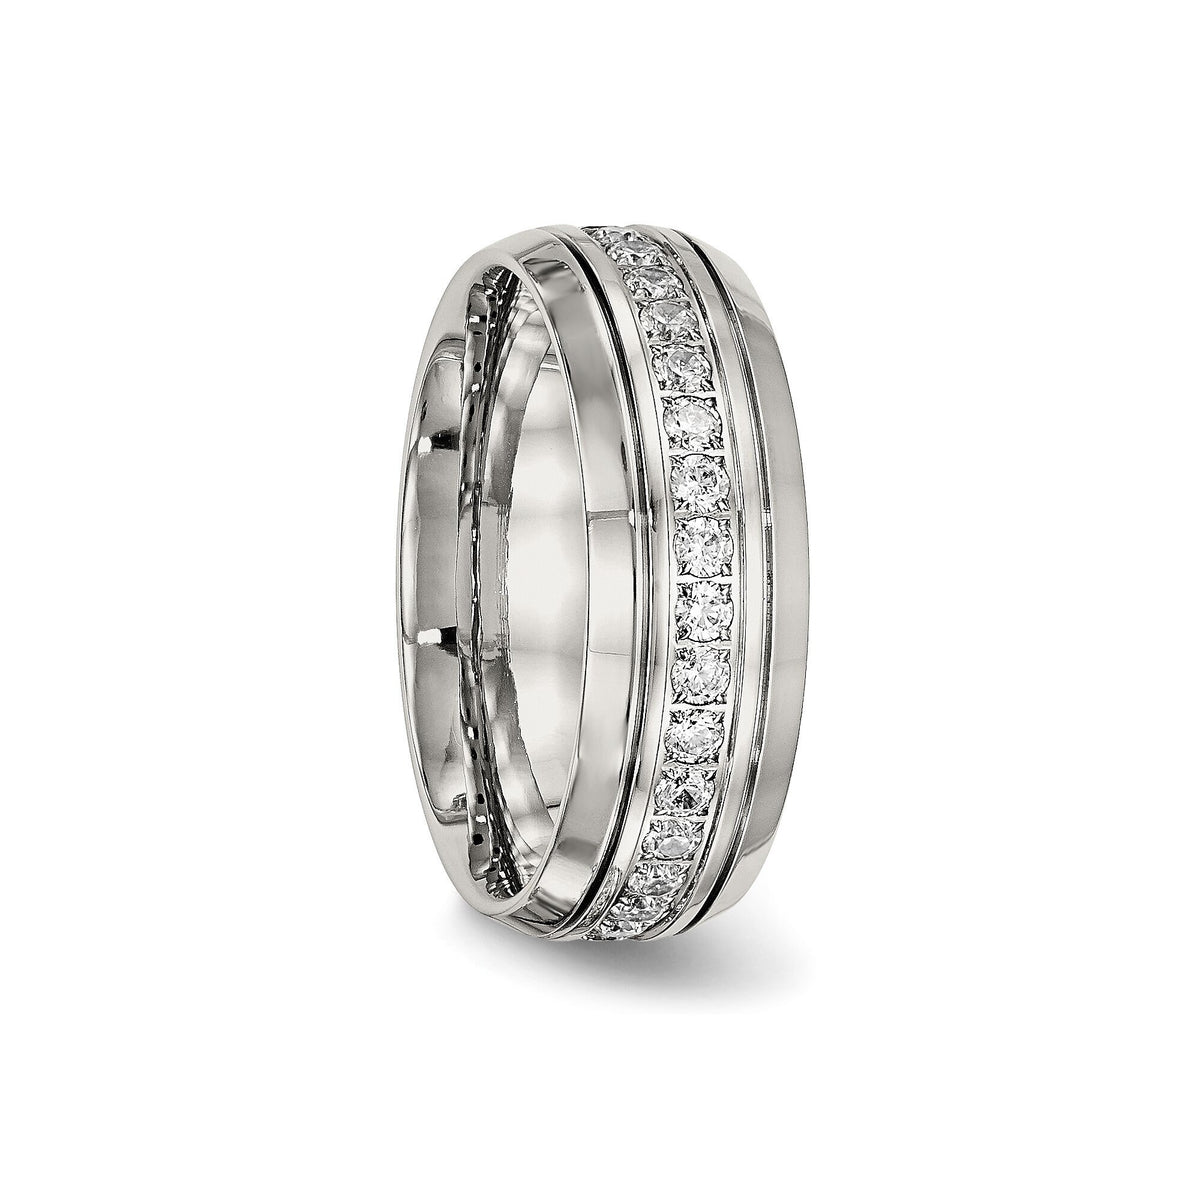 Mens Stainless Steel Polished and Grooved with CZ 8mm Half Round Band Mens Ring w/ Cubic Zirconias  Gift Box Included